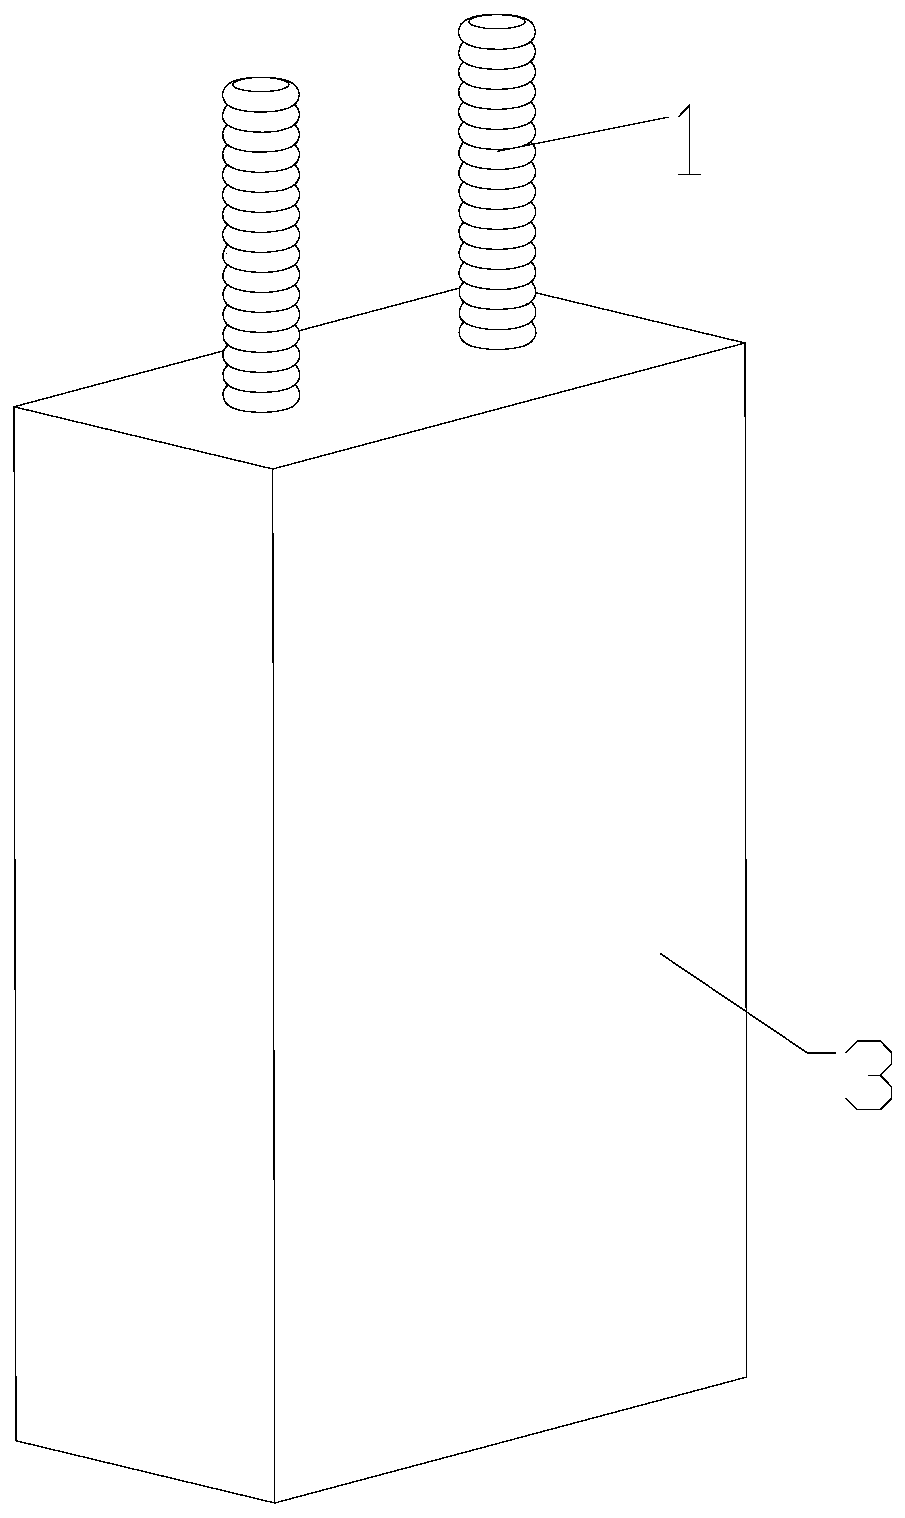 Box body structure of capacitor, capacitor and power transmission system